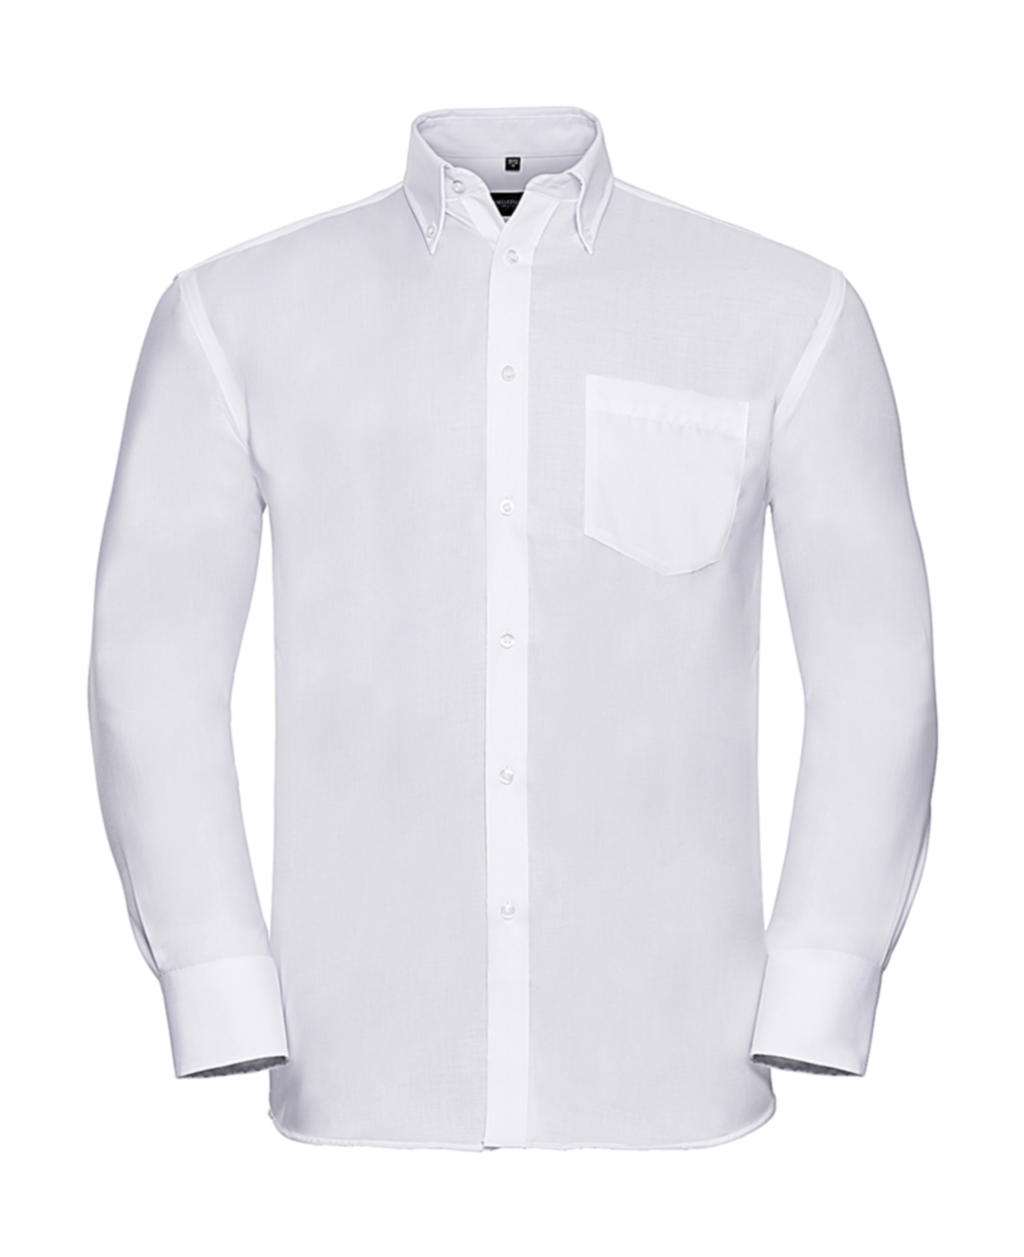  Mens LS Ultimate Non-iron Shirt in Farbe White